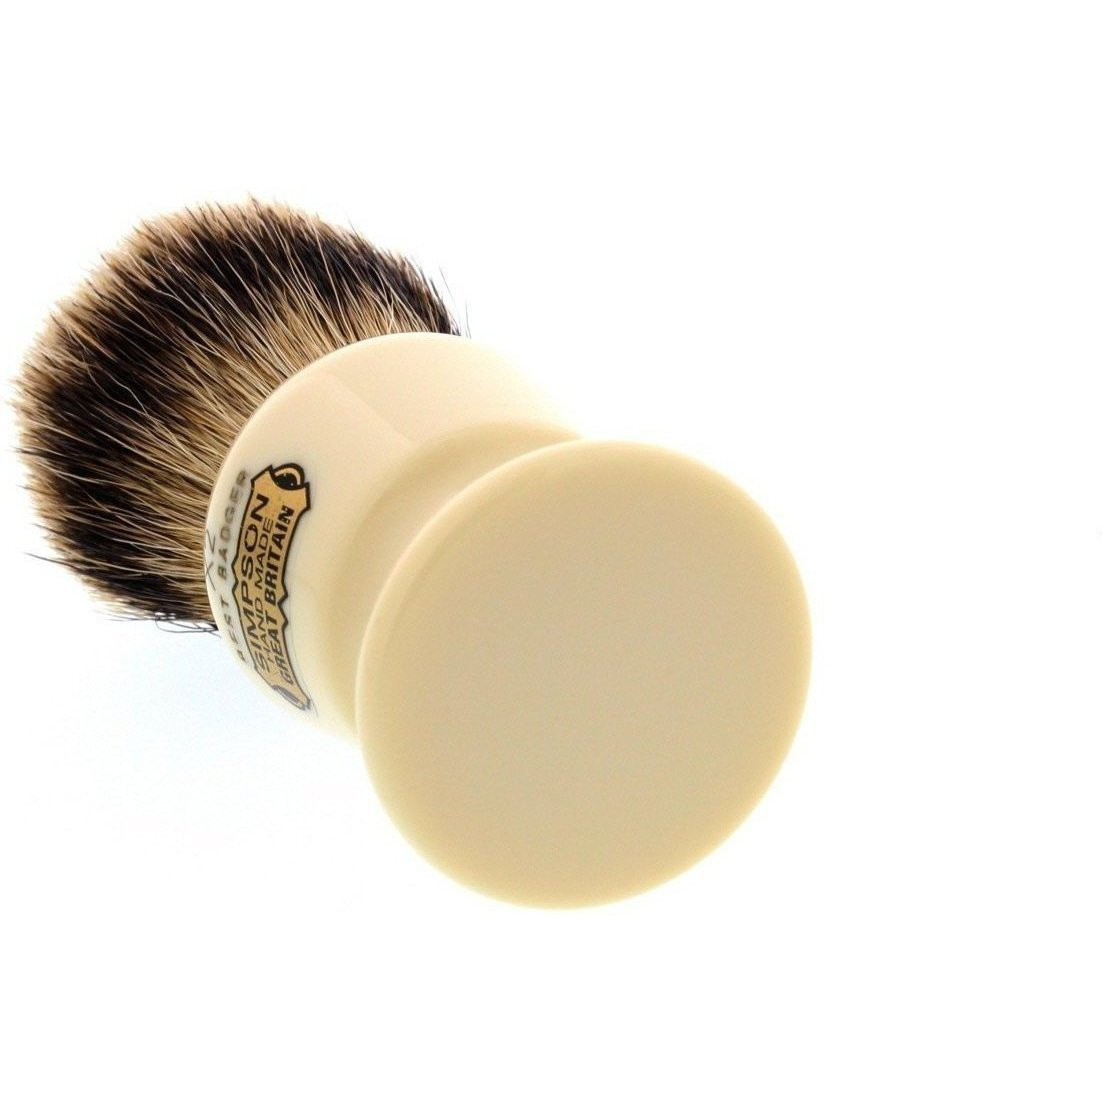 Product image 3 for Simpson Commodore X2 Best Badger Shaving Brush X2B